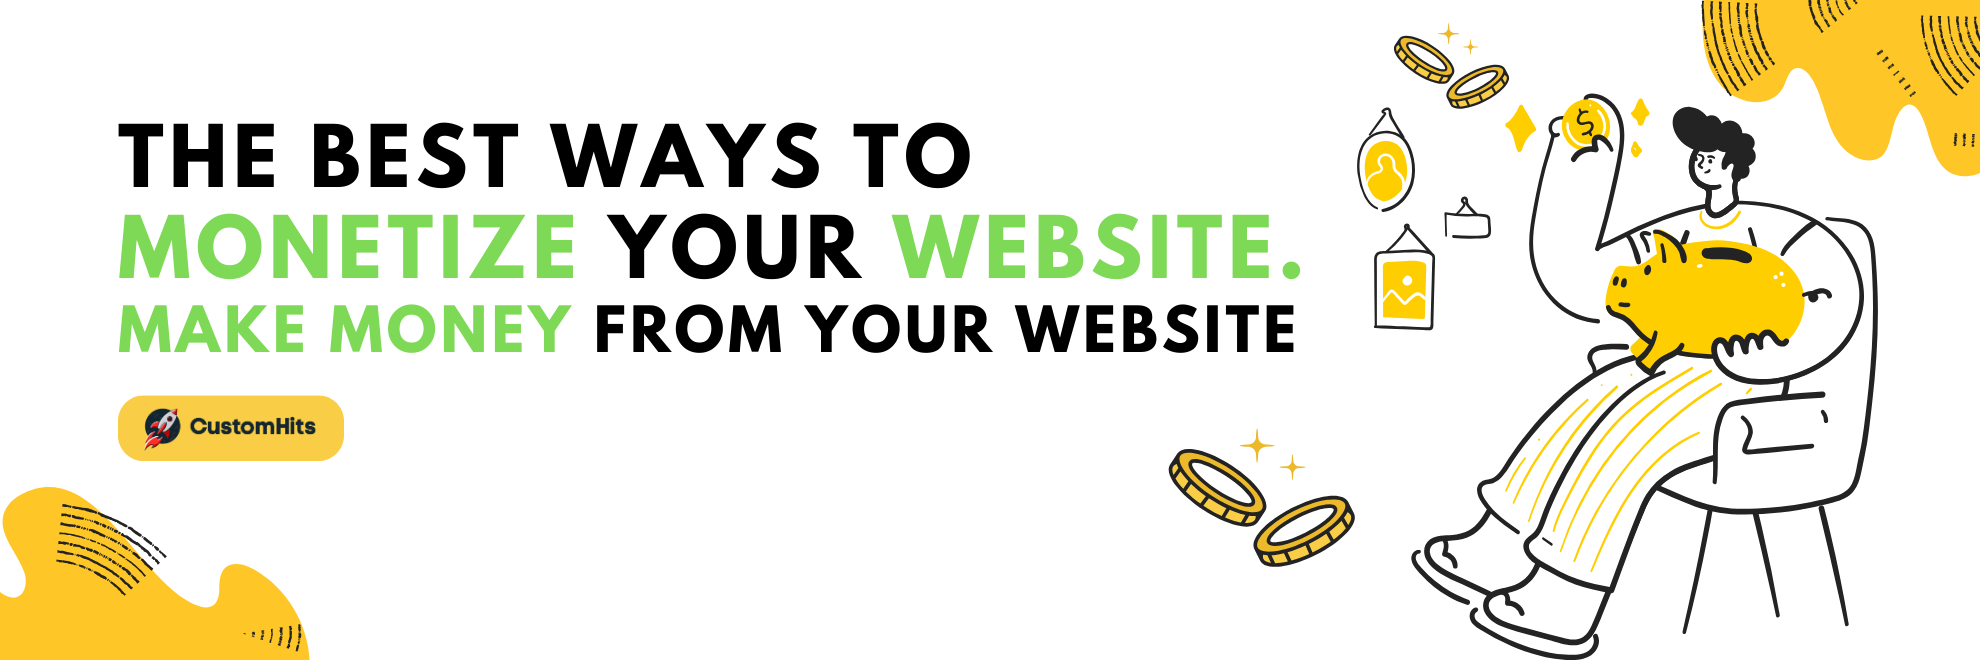 The Best Ways to Monetize Your Website. Make Money From Your Website